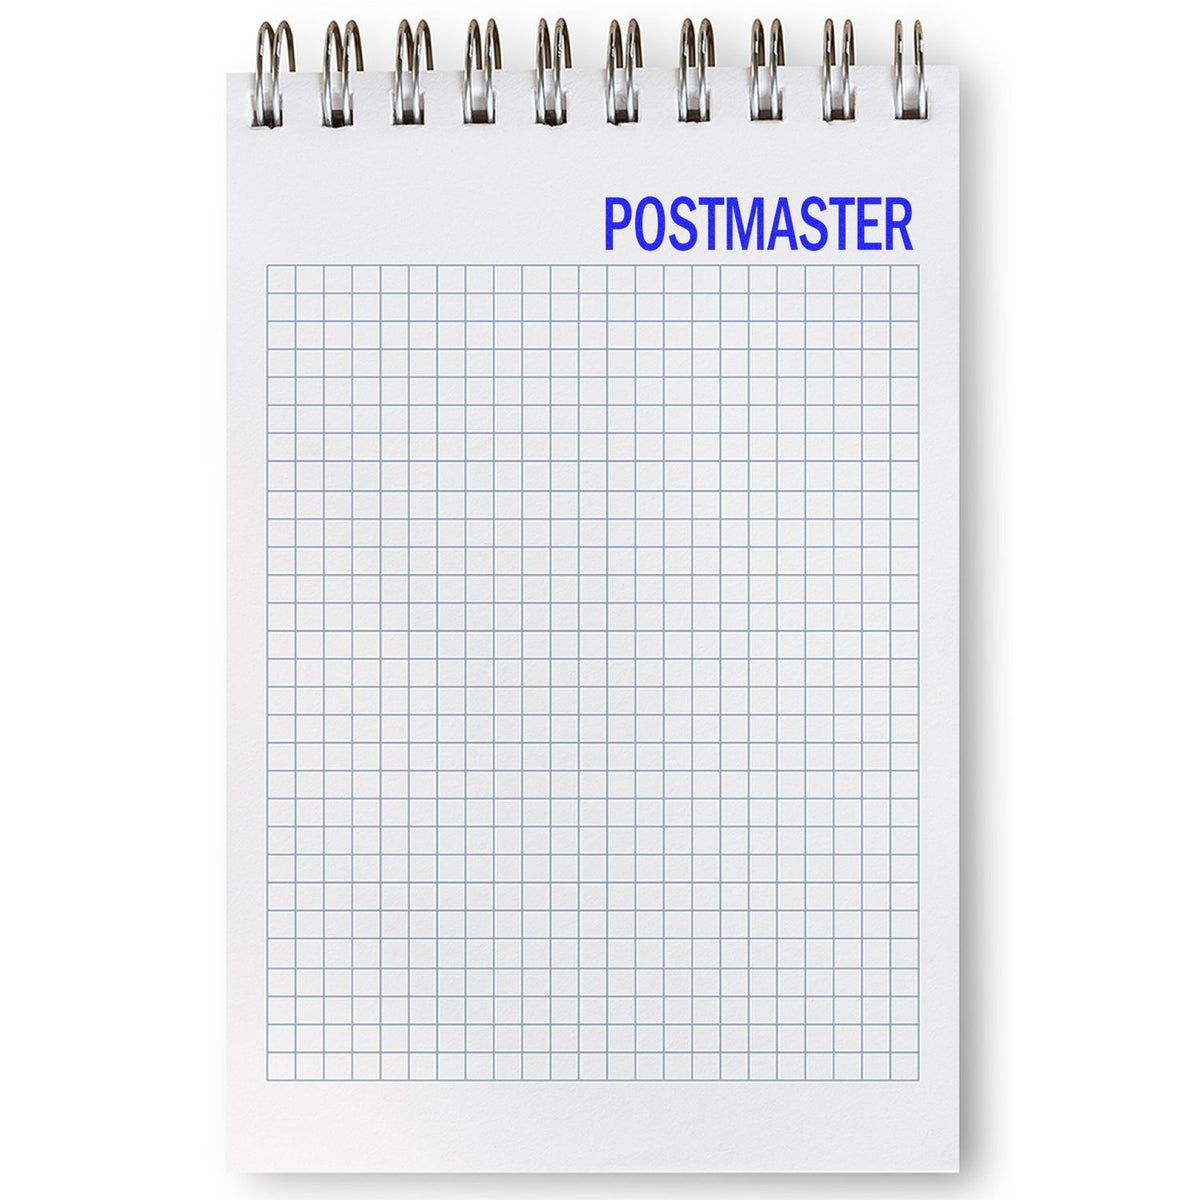 Postmaster Rubber Stamp In Use Photo